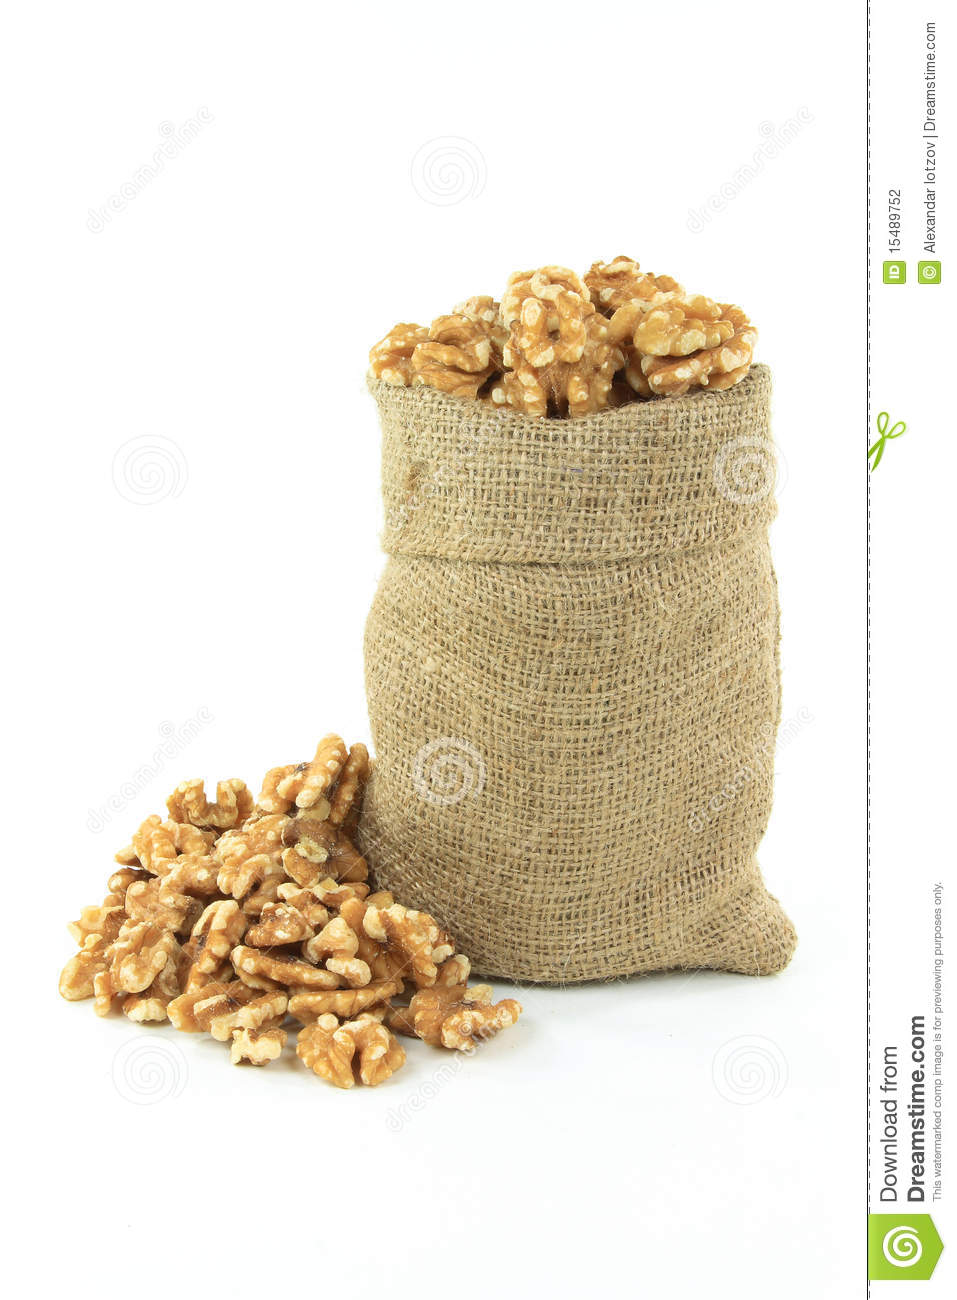 Still Picture Of Burlap Bag Full With Walnuts And Walnuts On Pile Over